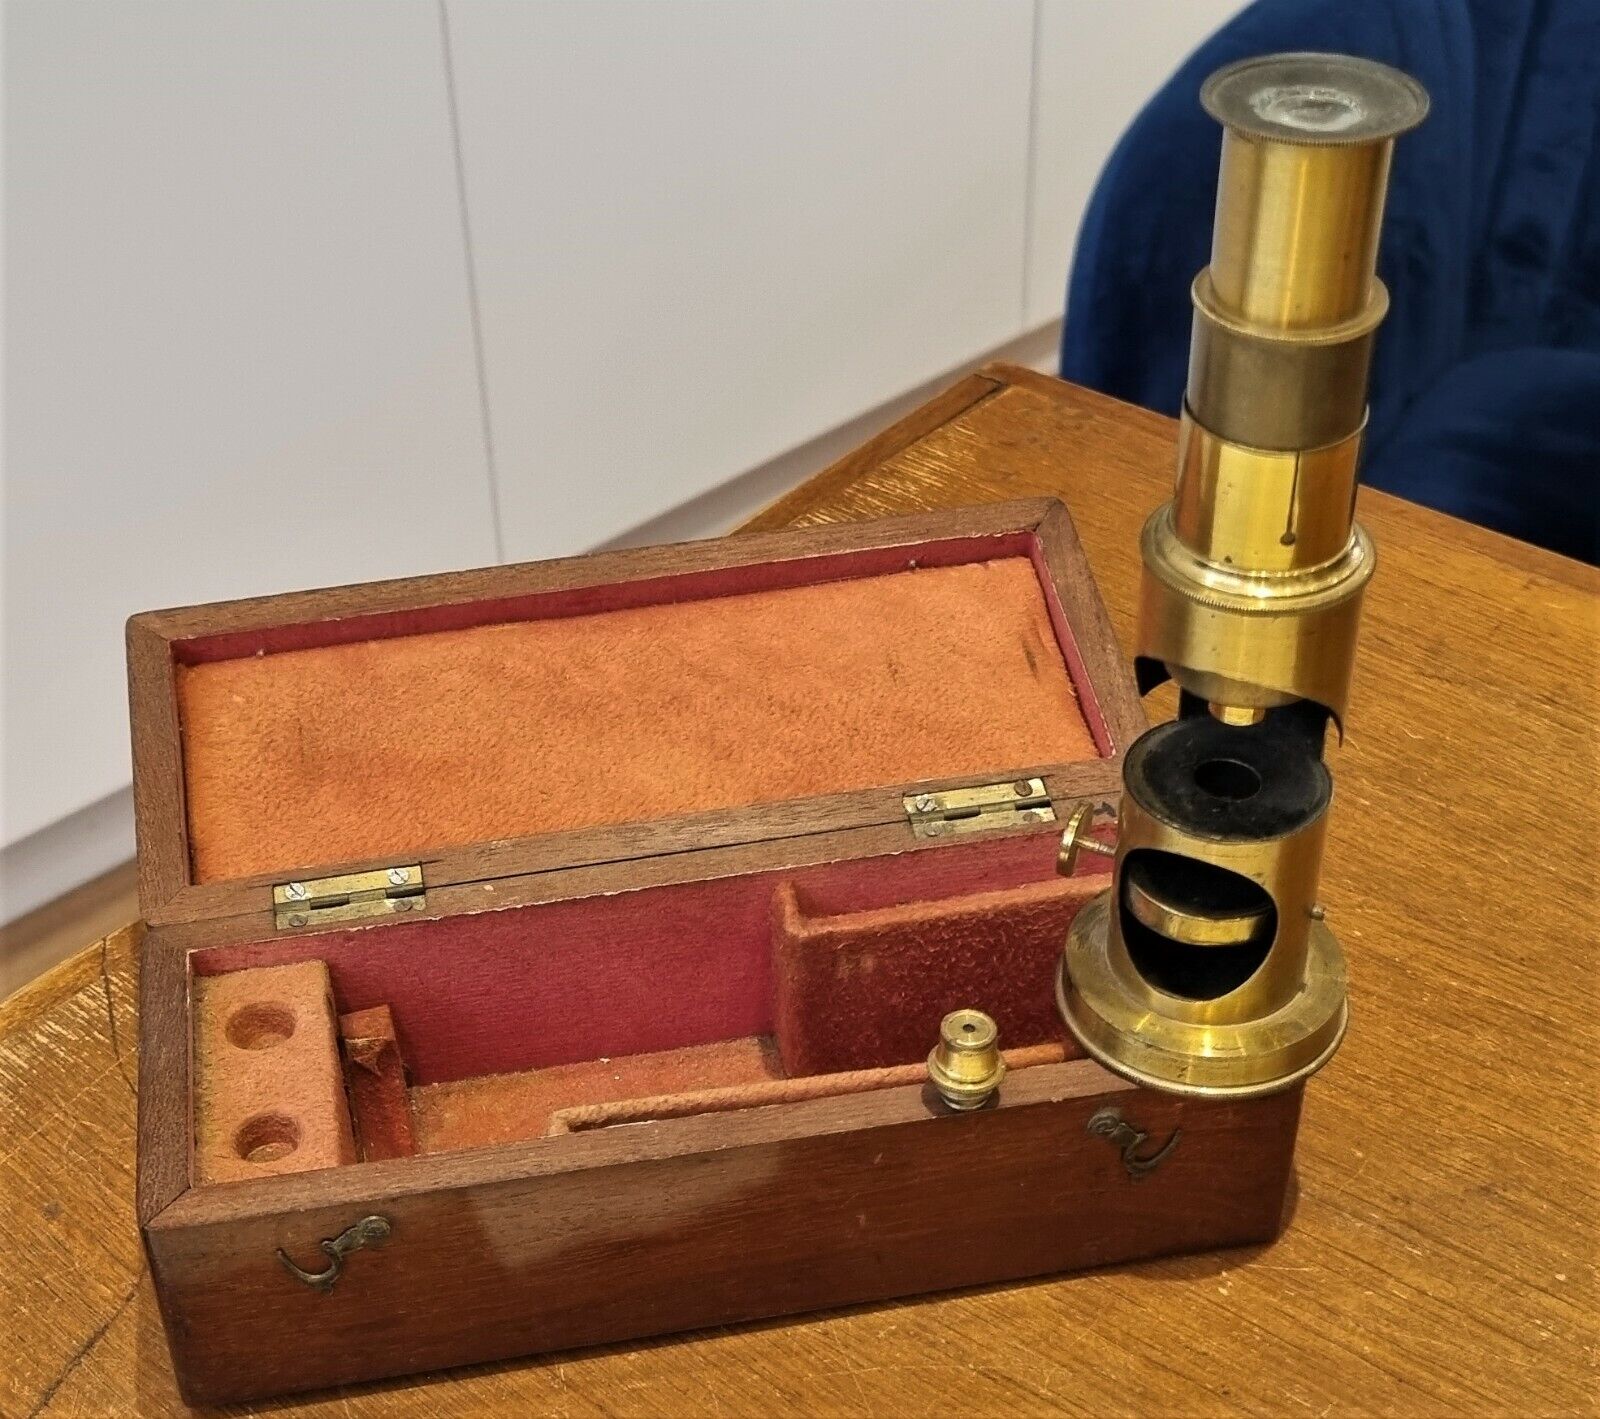 An early student drum microscope in velvet-lined case, c. 1840